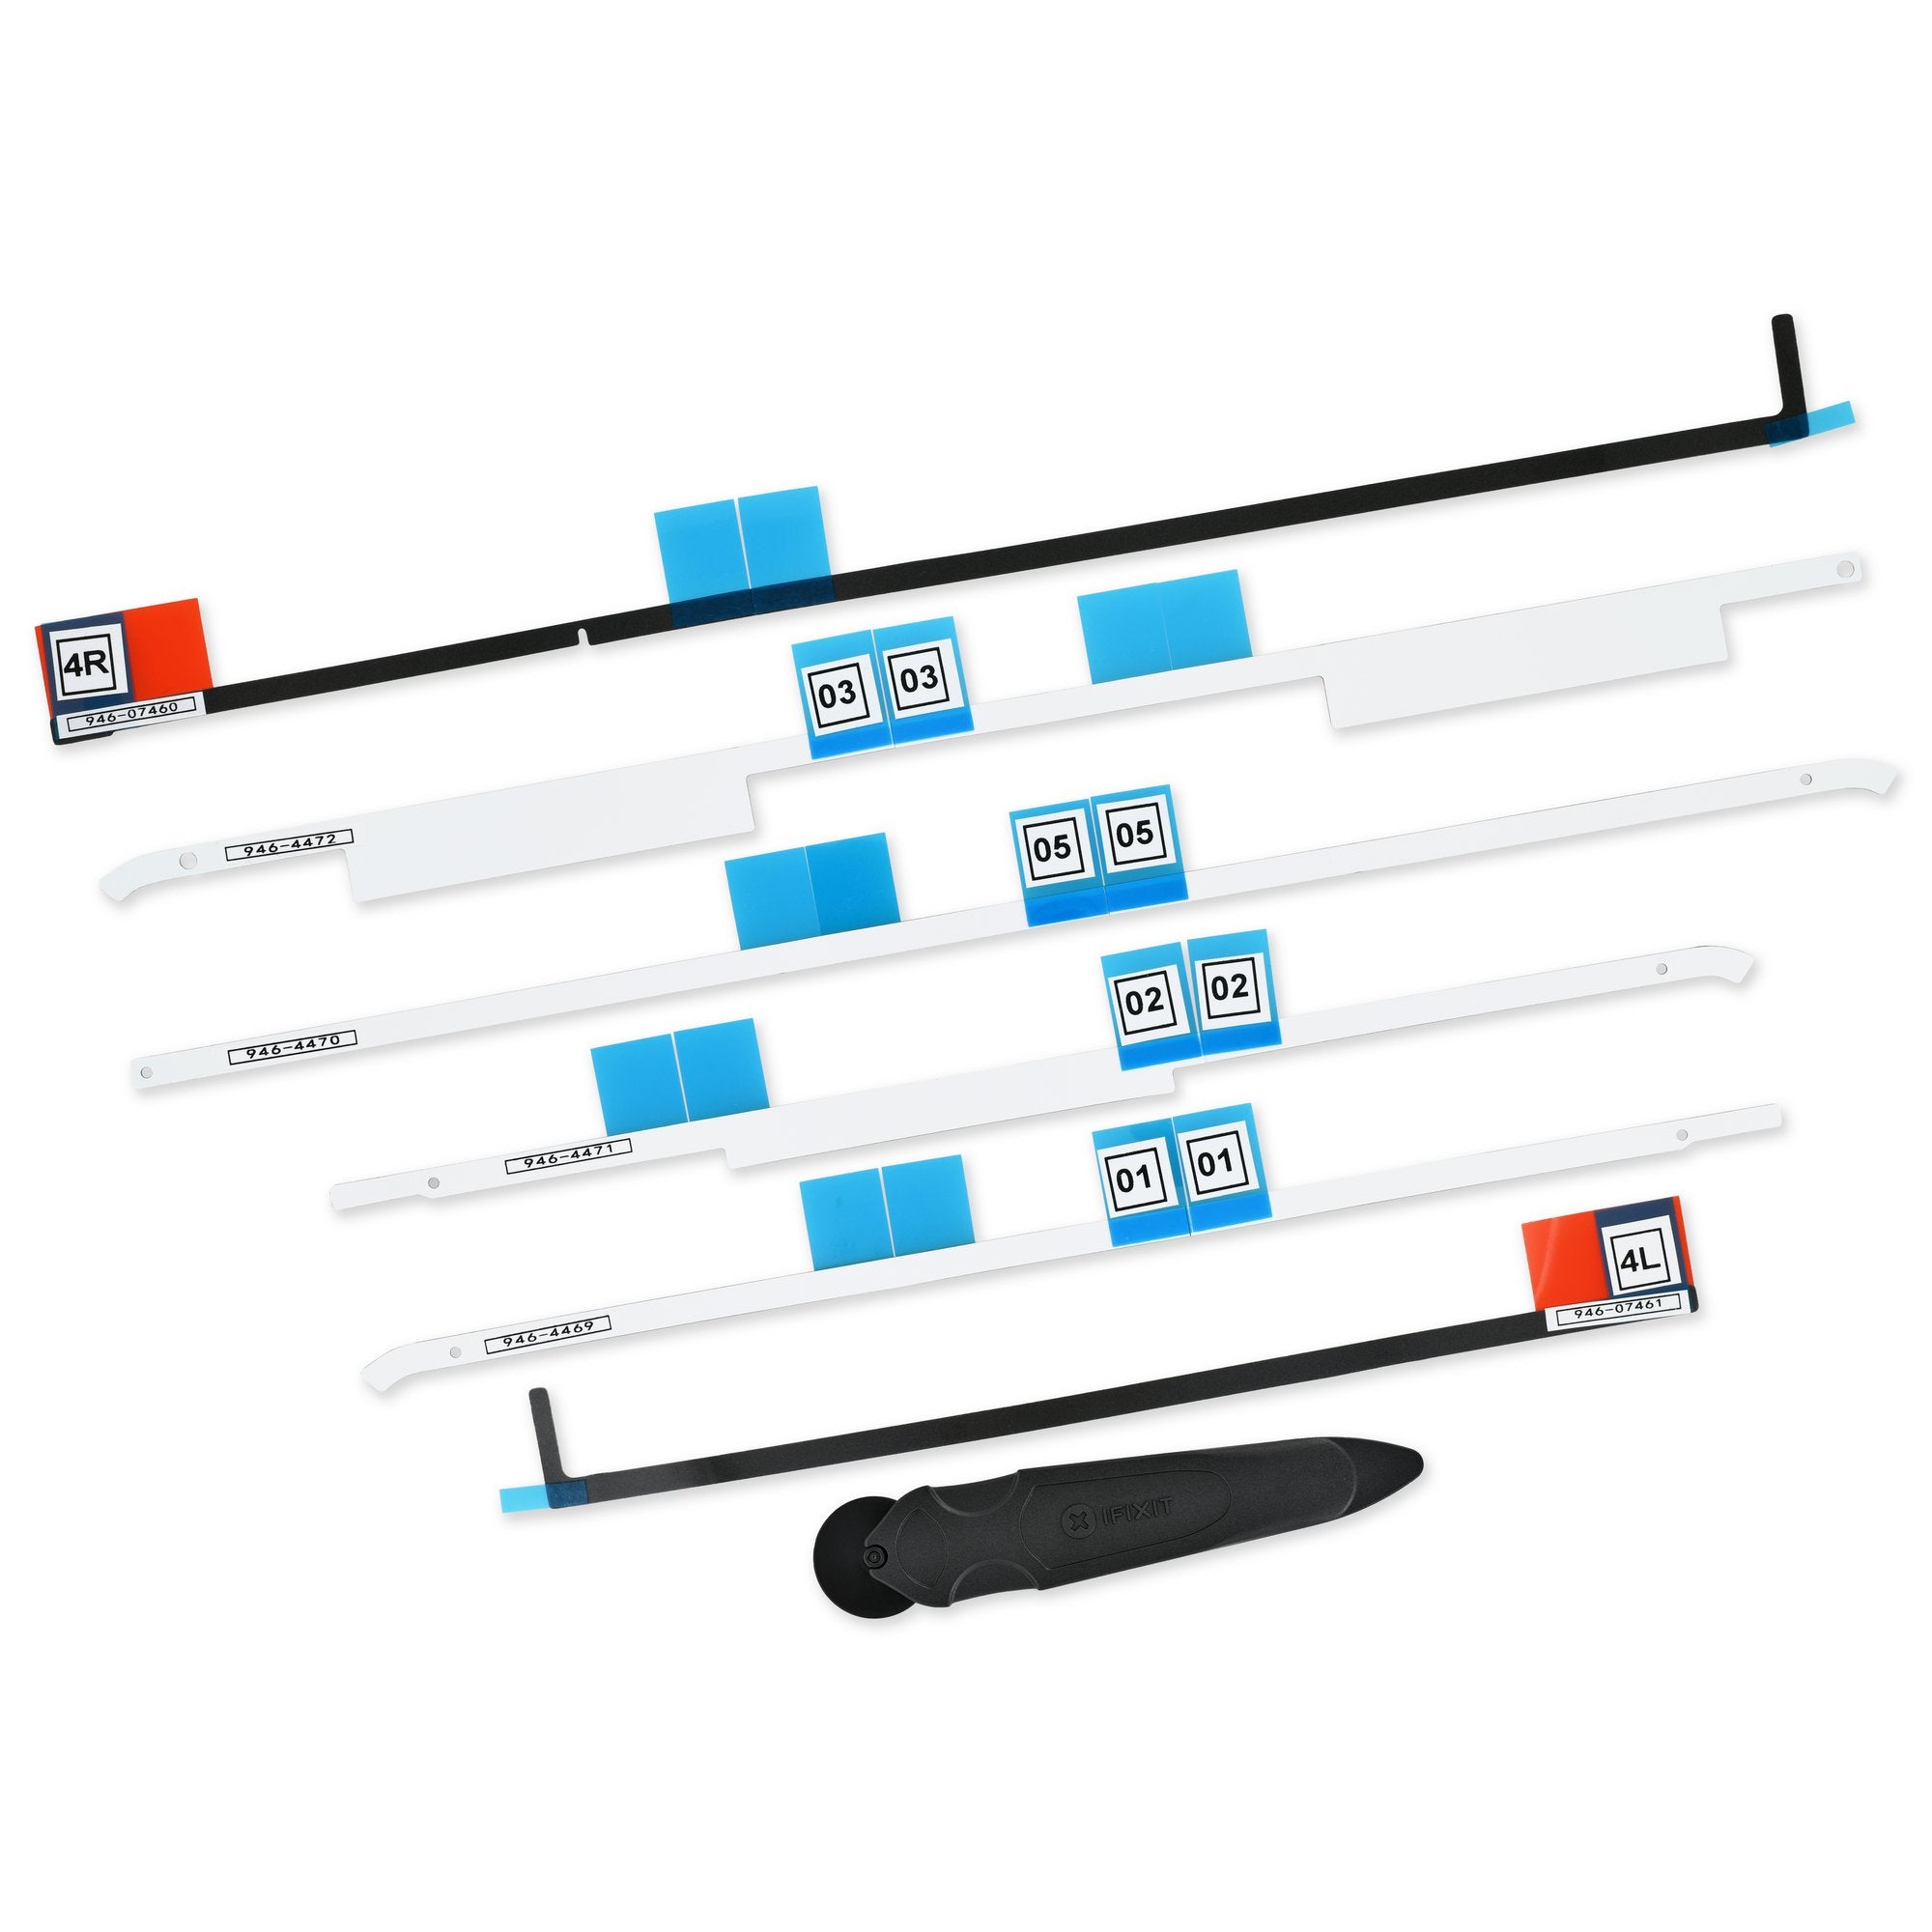 iMac Intel 21.5 A1418 and A2116 (2012-2019) Adhesive Strips